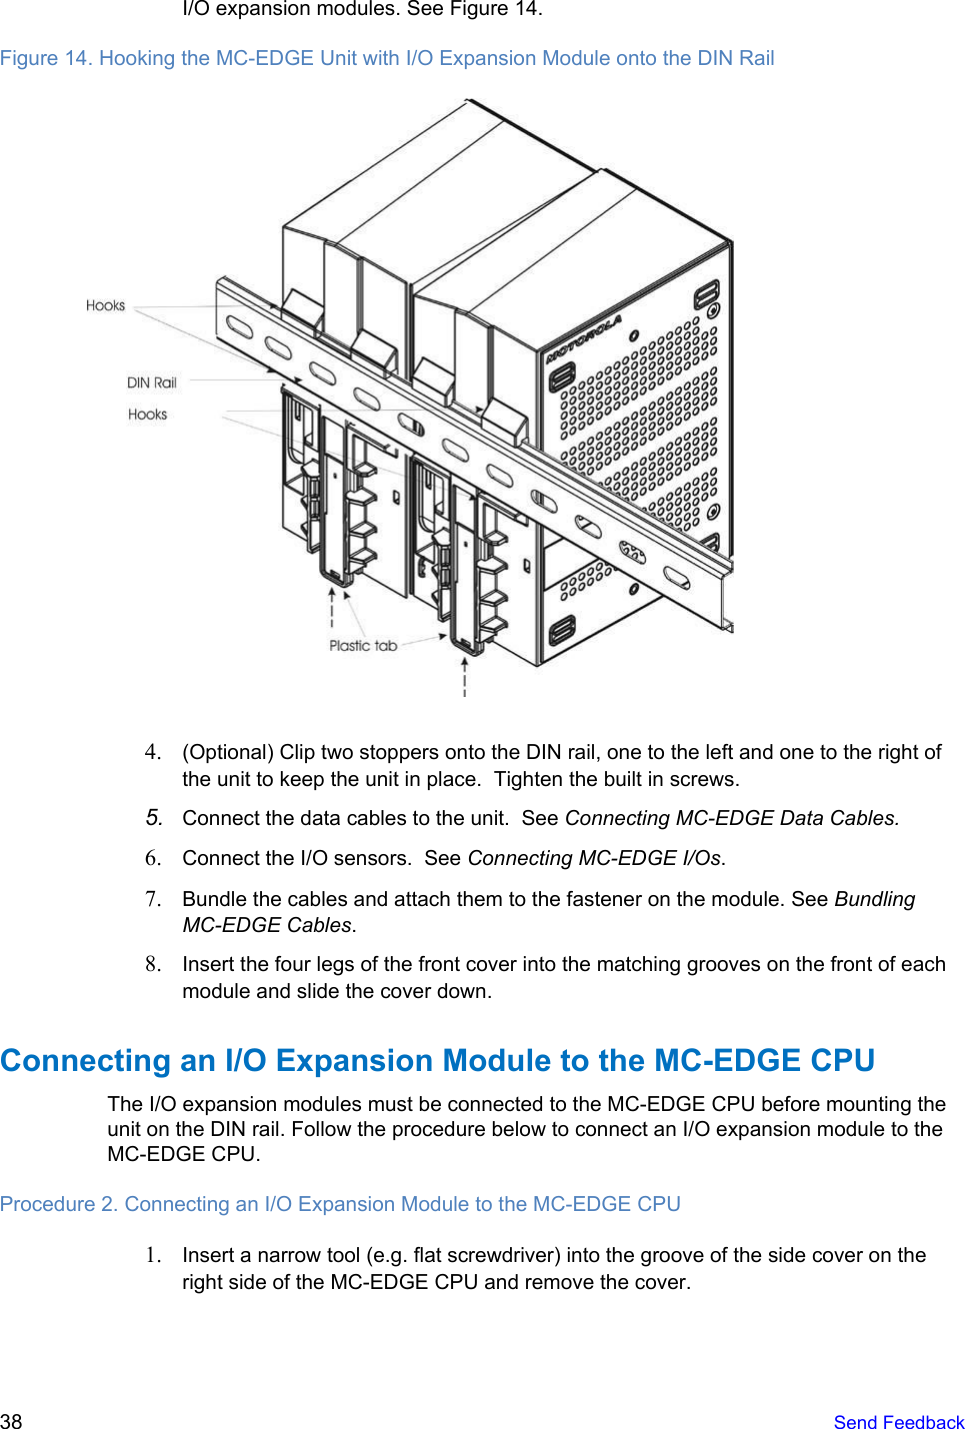    I/O expansion modules. See Figure 14. Figure 14. Hooking the MC-EDGE Unit with I/O Expansion Module onto the DIN Rail   4. (Optional) Clip two stoppers onto the DIN rail, one to the left and one to the right of the unit to keep the unit in place.  Tighten the built in screws. 5. Connect the data cables to the unit.  See Connecting MC-EDGE Data Cables. 6. Connect the I/O sensors.  See Connecting MC-EDGE I/Os. 7. Bundle the cables and attach them to the fastener on the module. See Bundling MC-EDGE Cables. 8. Insert the four legs of the front cover into the matching grooves on the front of each module and slide the cover down. Connecting an I/O Expansion Module to the MC-EDGE CPU The I/O expansion modules must be connected to the MC-EDGE CPU before mounting the unit on the DIN rail. Follow the procedure below to connect an I/O expansion module to the MC-EDGE CPU. Procedure 2. Connecting an I/O Expansion Module to the MC-EDGE CPU 1. Insert a narrow tool (e.g. flat screwdriver) into the groove of the side cover on the right side of the MC-EDGE CPU and remove the cover. 38   Send Feedback  